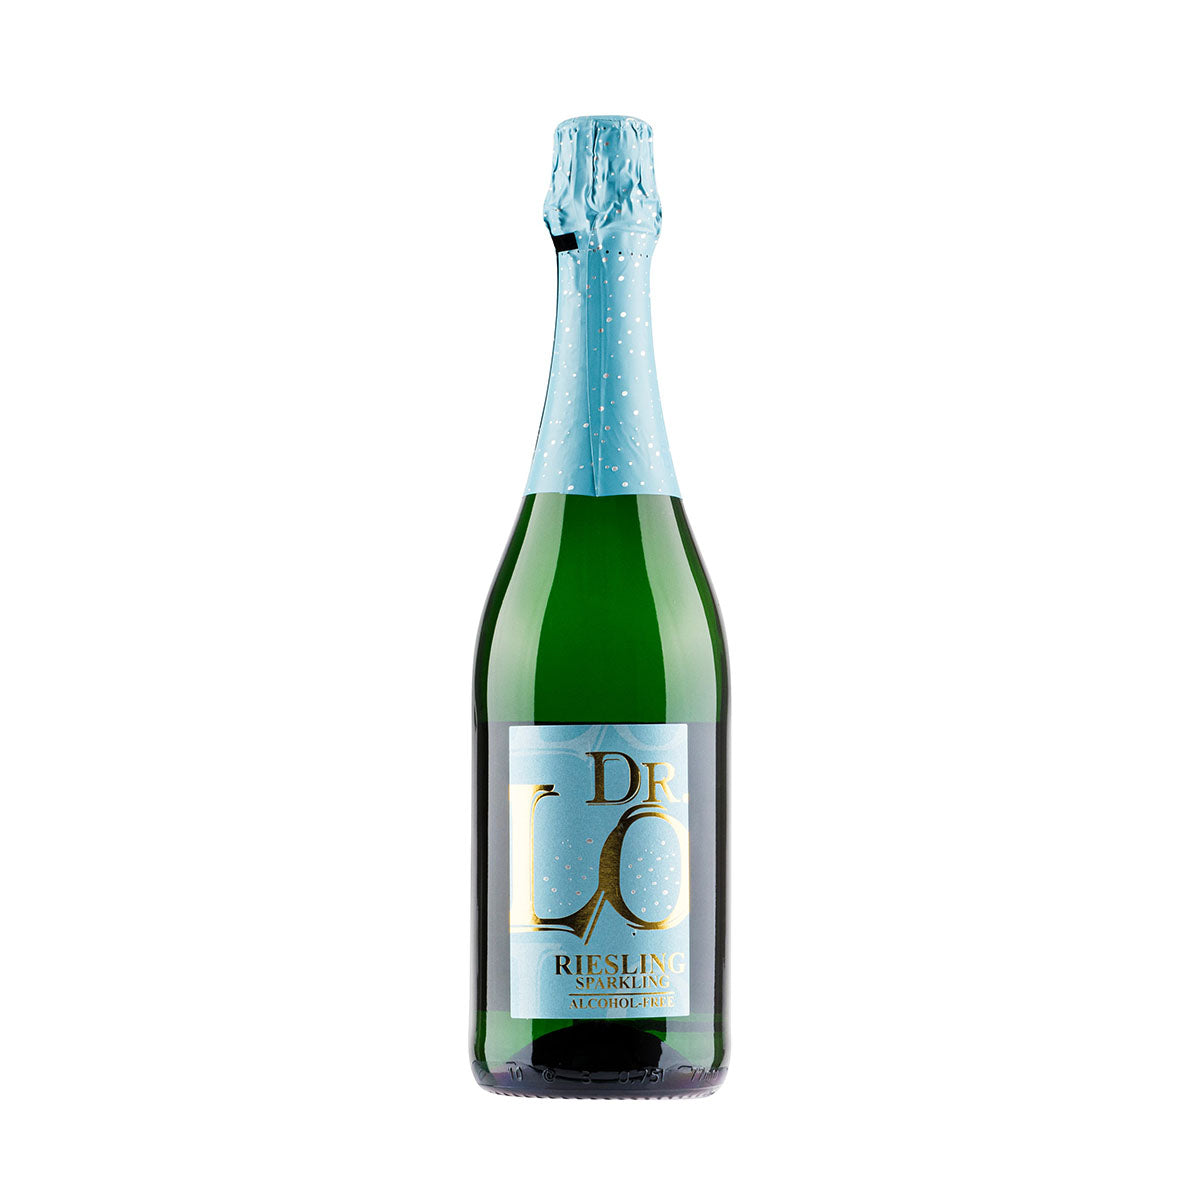 Dr Loosen 'Dr Lo' Alcohol Free Sparkling Riesling NV